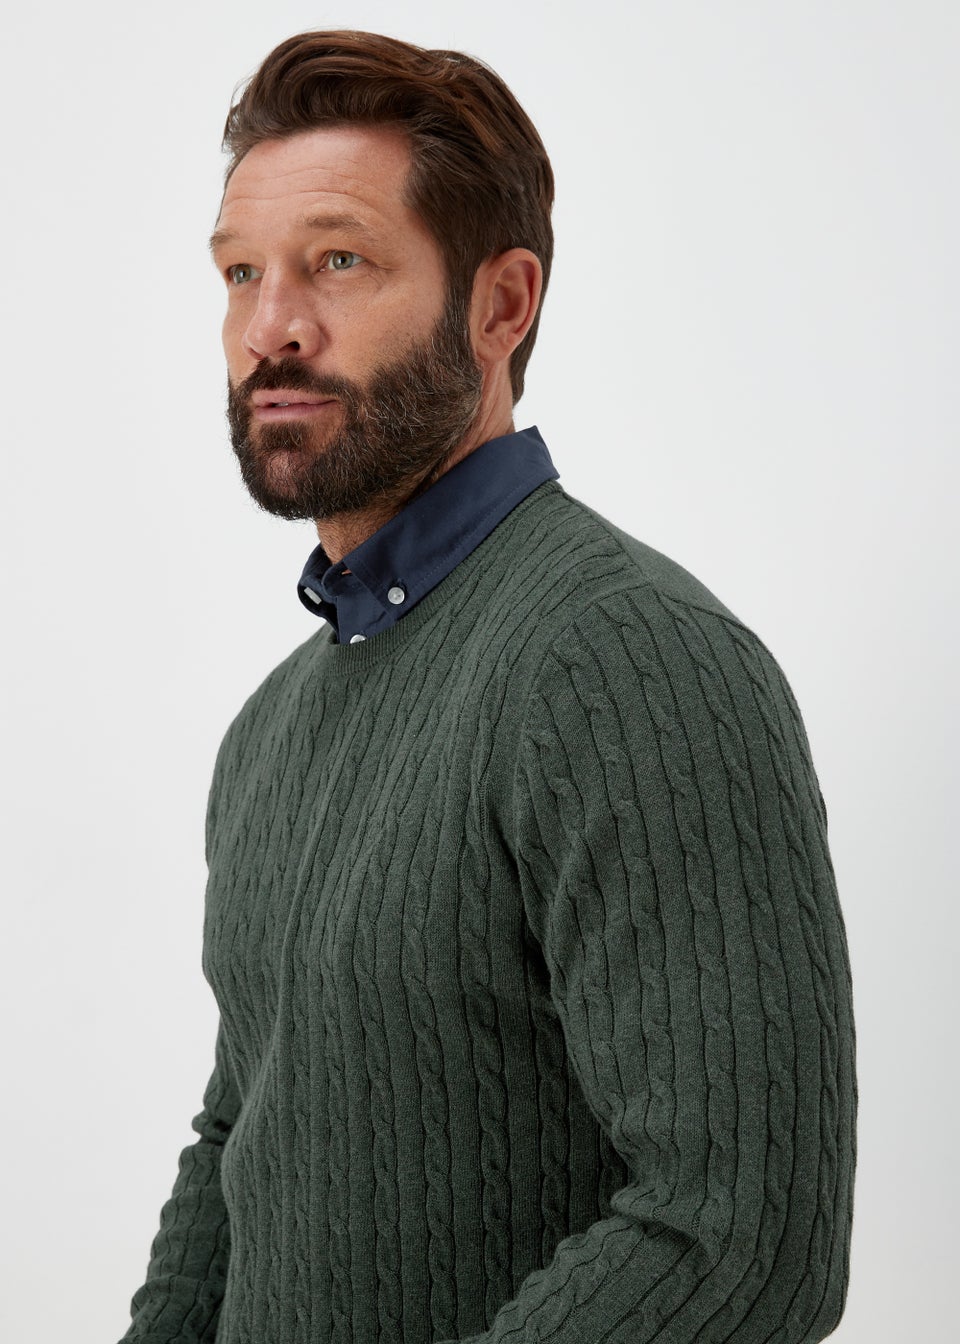 Lincoln Green Mock Shirt Cable Knit  Jumper